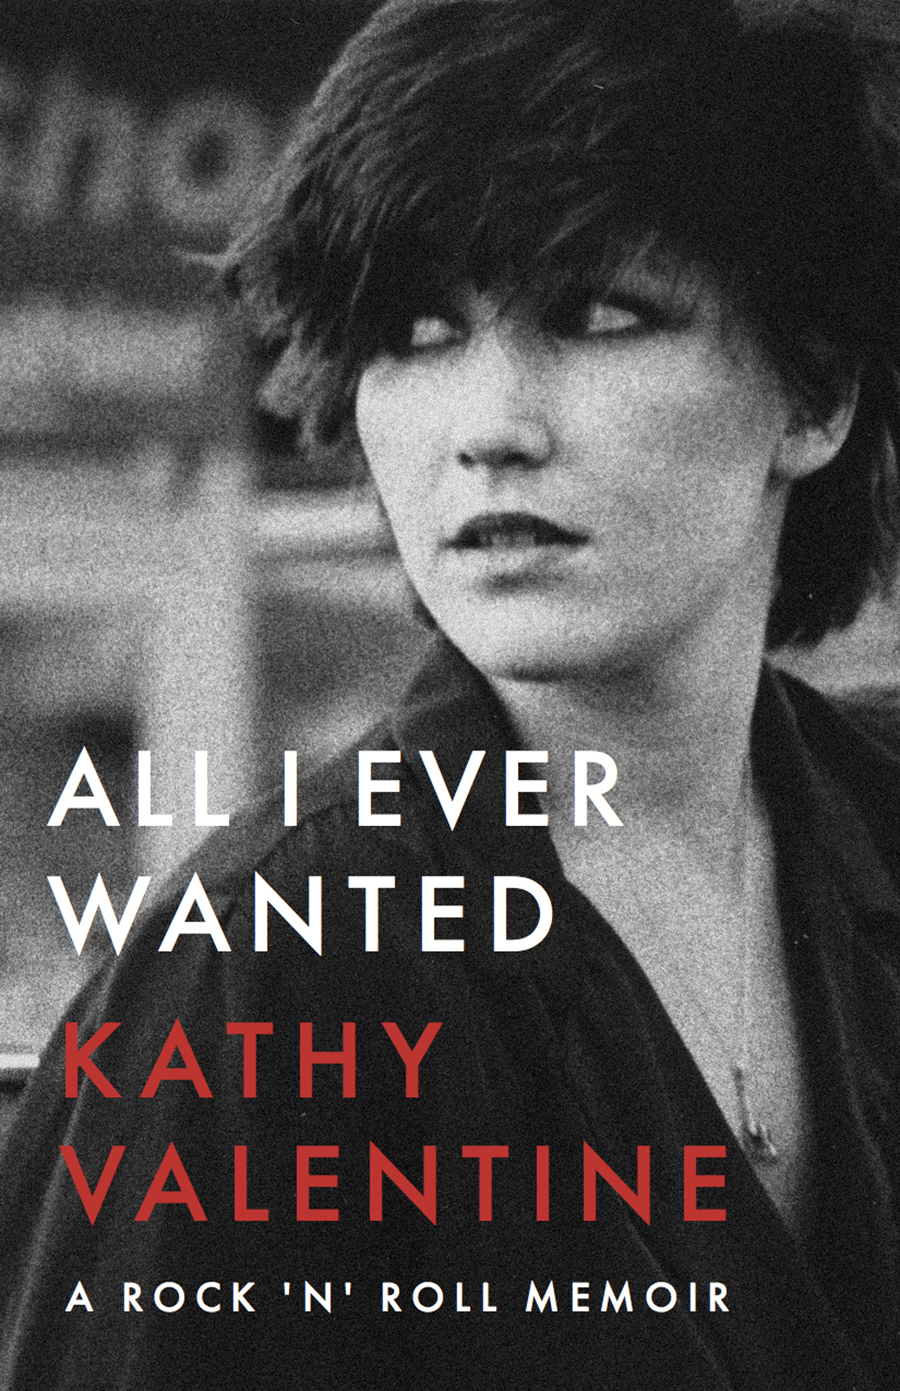 Kathy Valentine - "All I Ever Wanted"